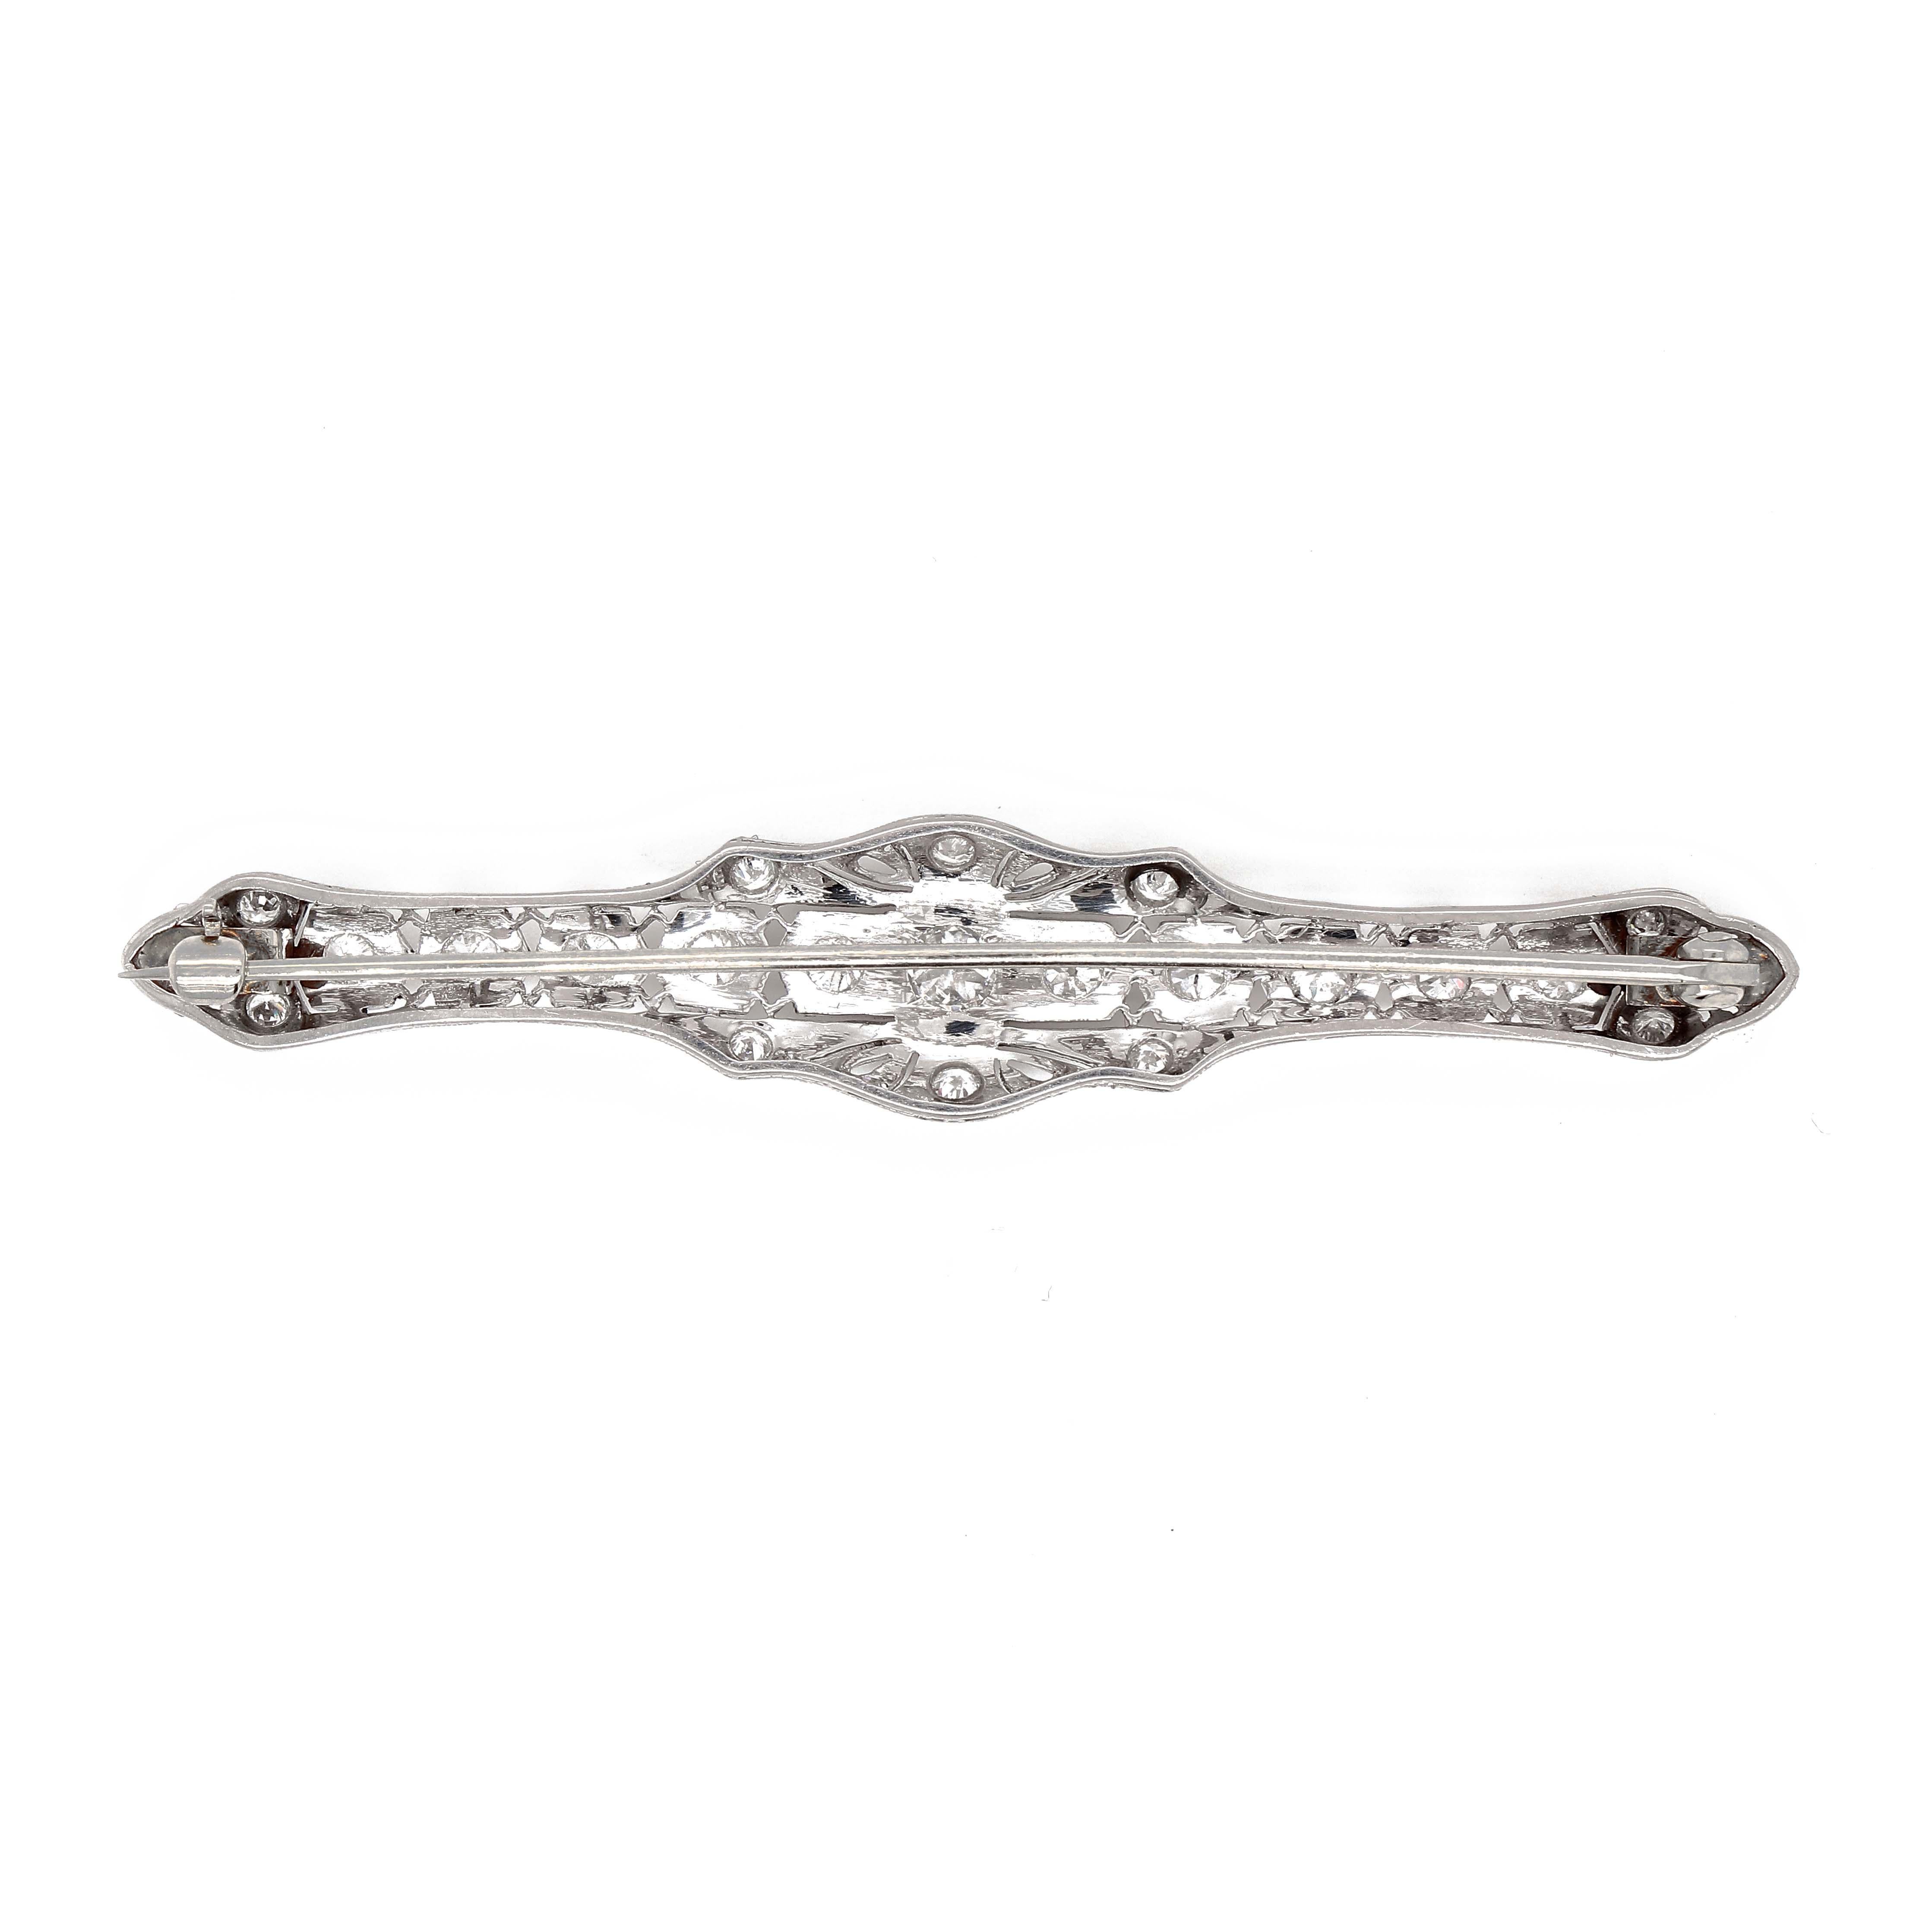 European Art Deco 3.10 Carat Diamond Brooch In Excellent Condition For Sale In Houston, TX